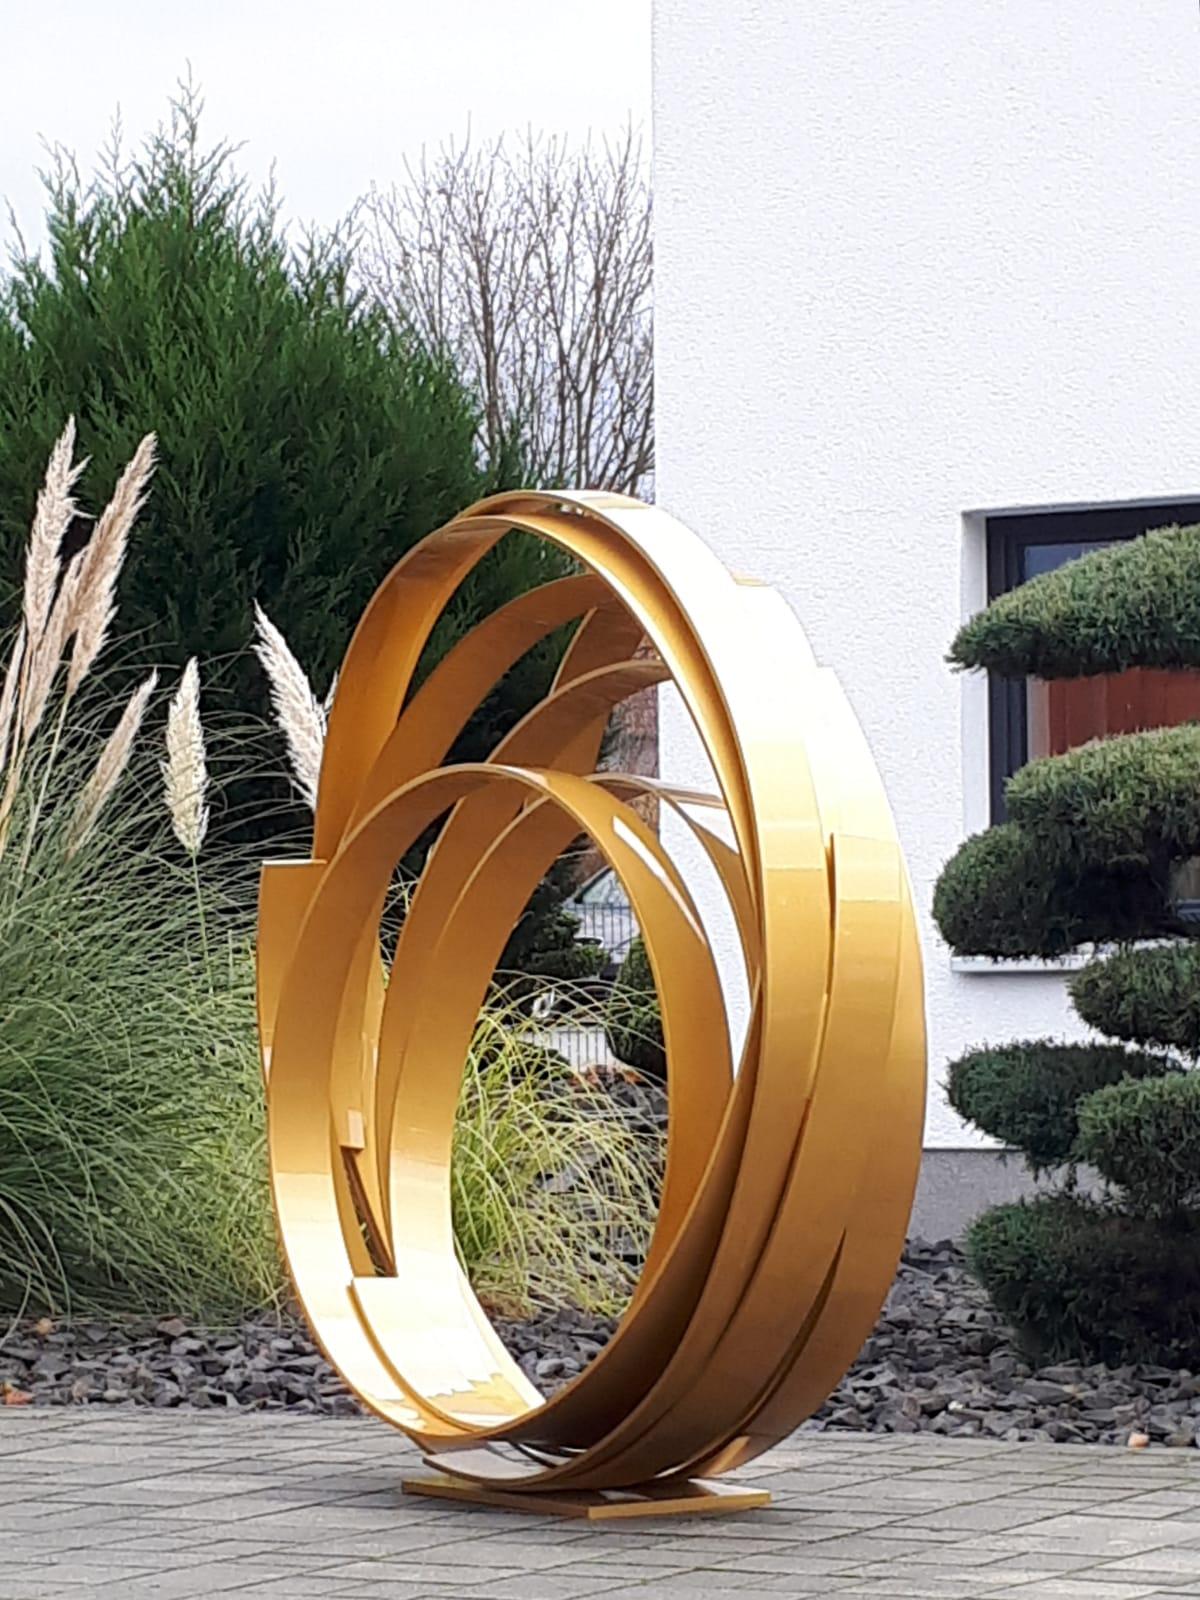 Very large Contemporary powder coated aluminum sculpture for inside or garden outdoor spaces.
Beautiful spiral dancing and intertwining.

This is a large scale outdoor or indoor sculpture made from aluminum and then powder coated in a golden